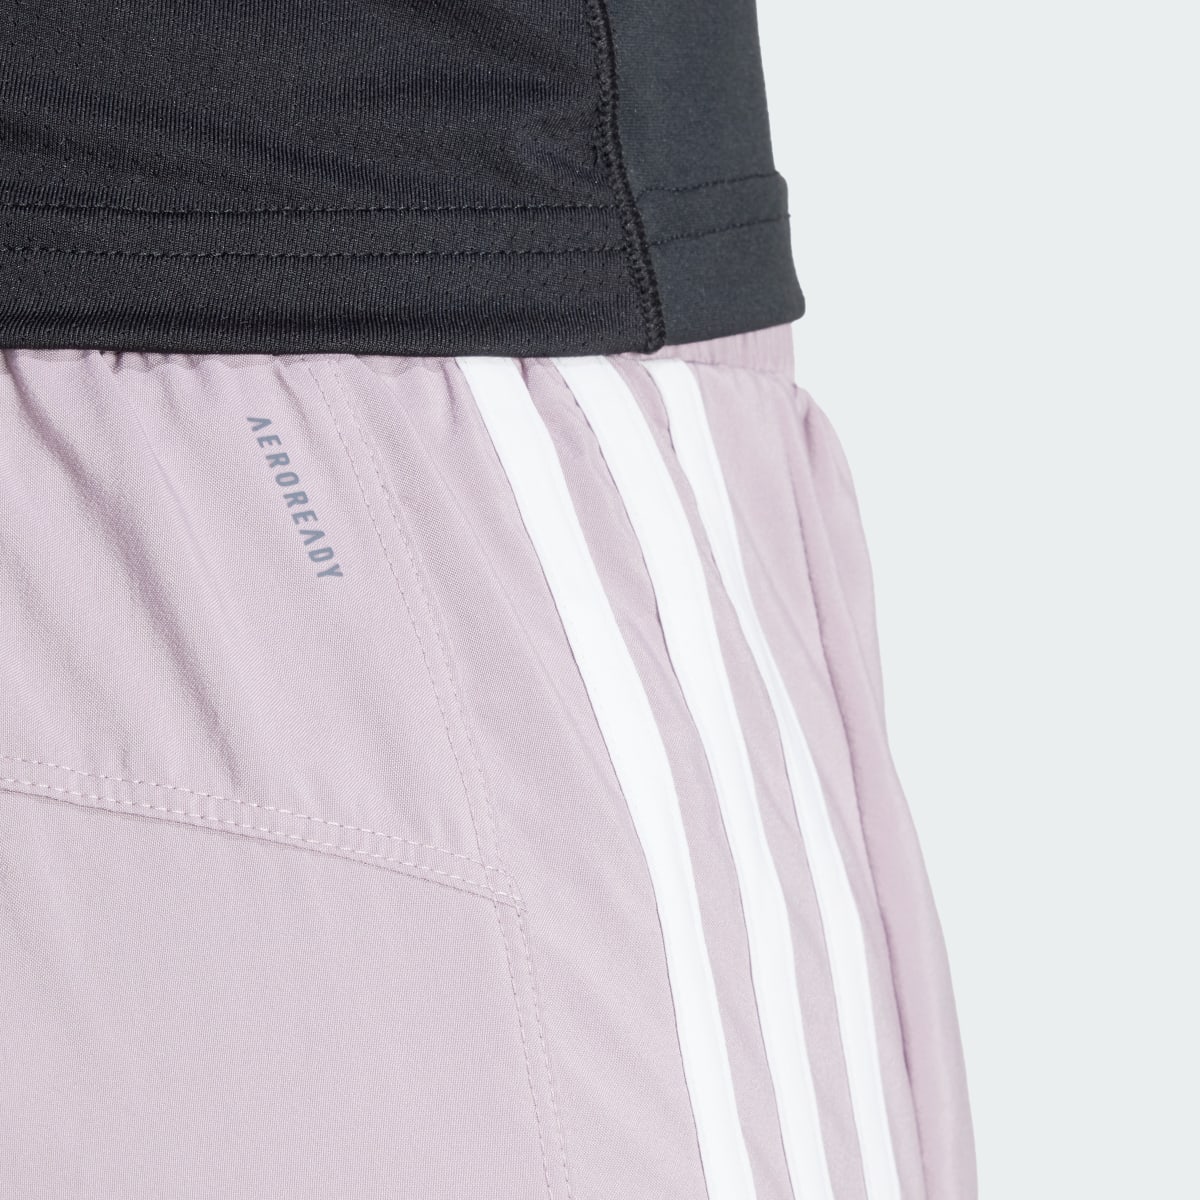 Adidas Pacer Training 3-Stripes Woven High-Rise Shorts. 7